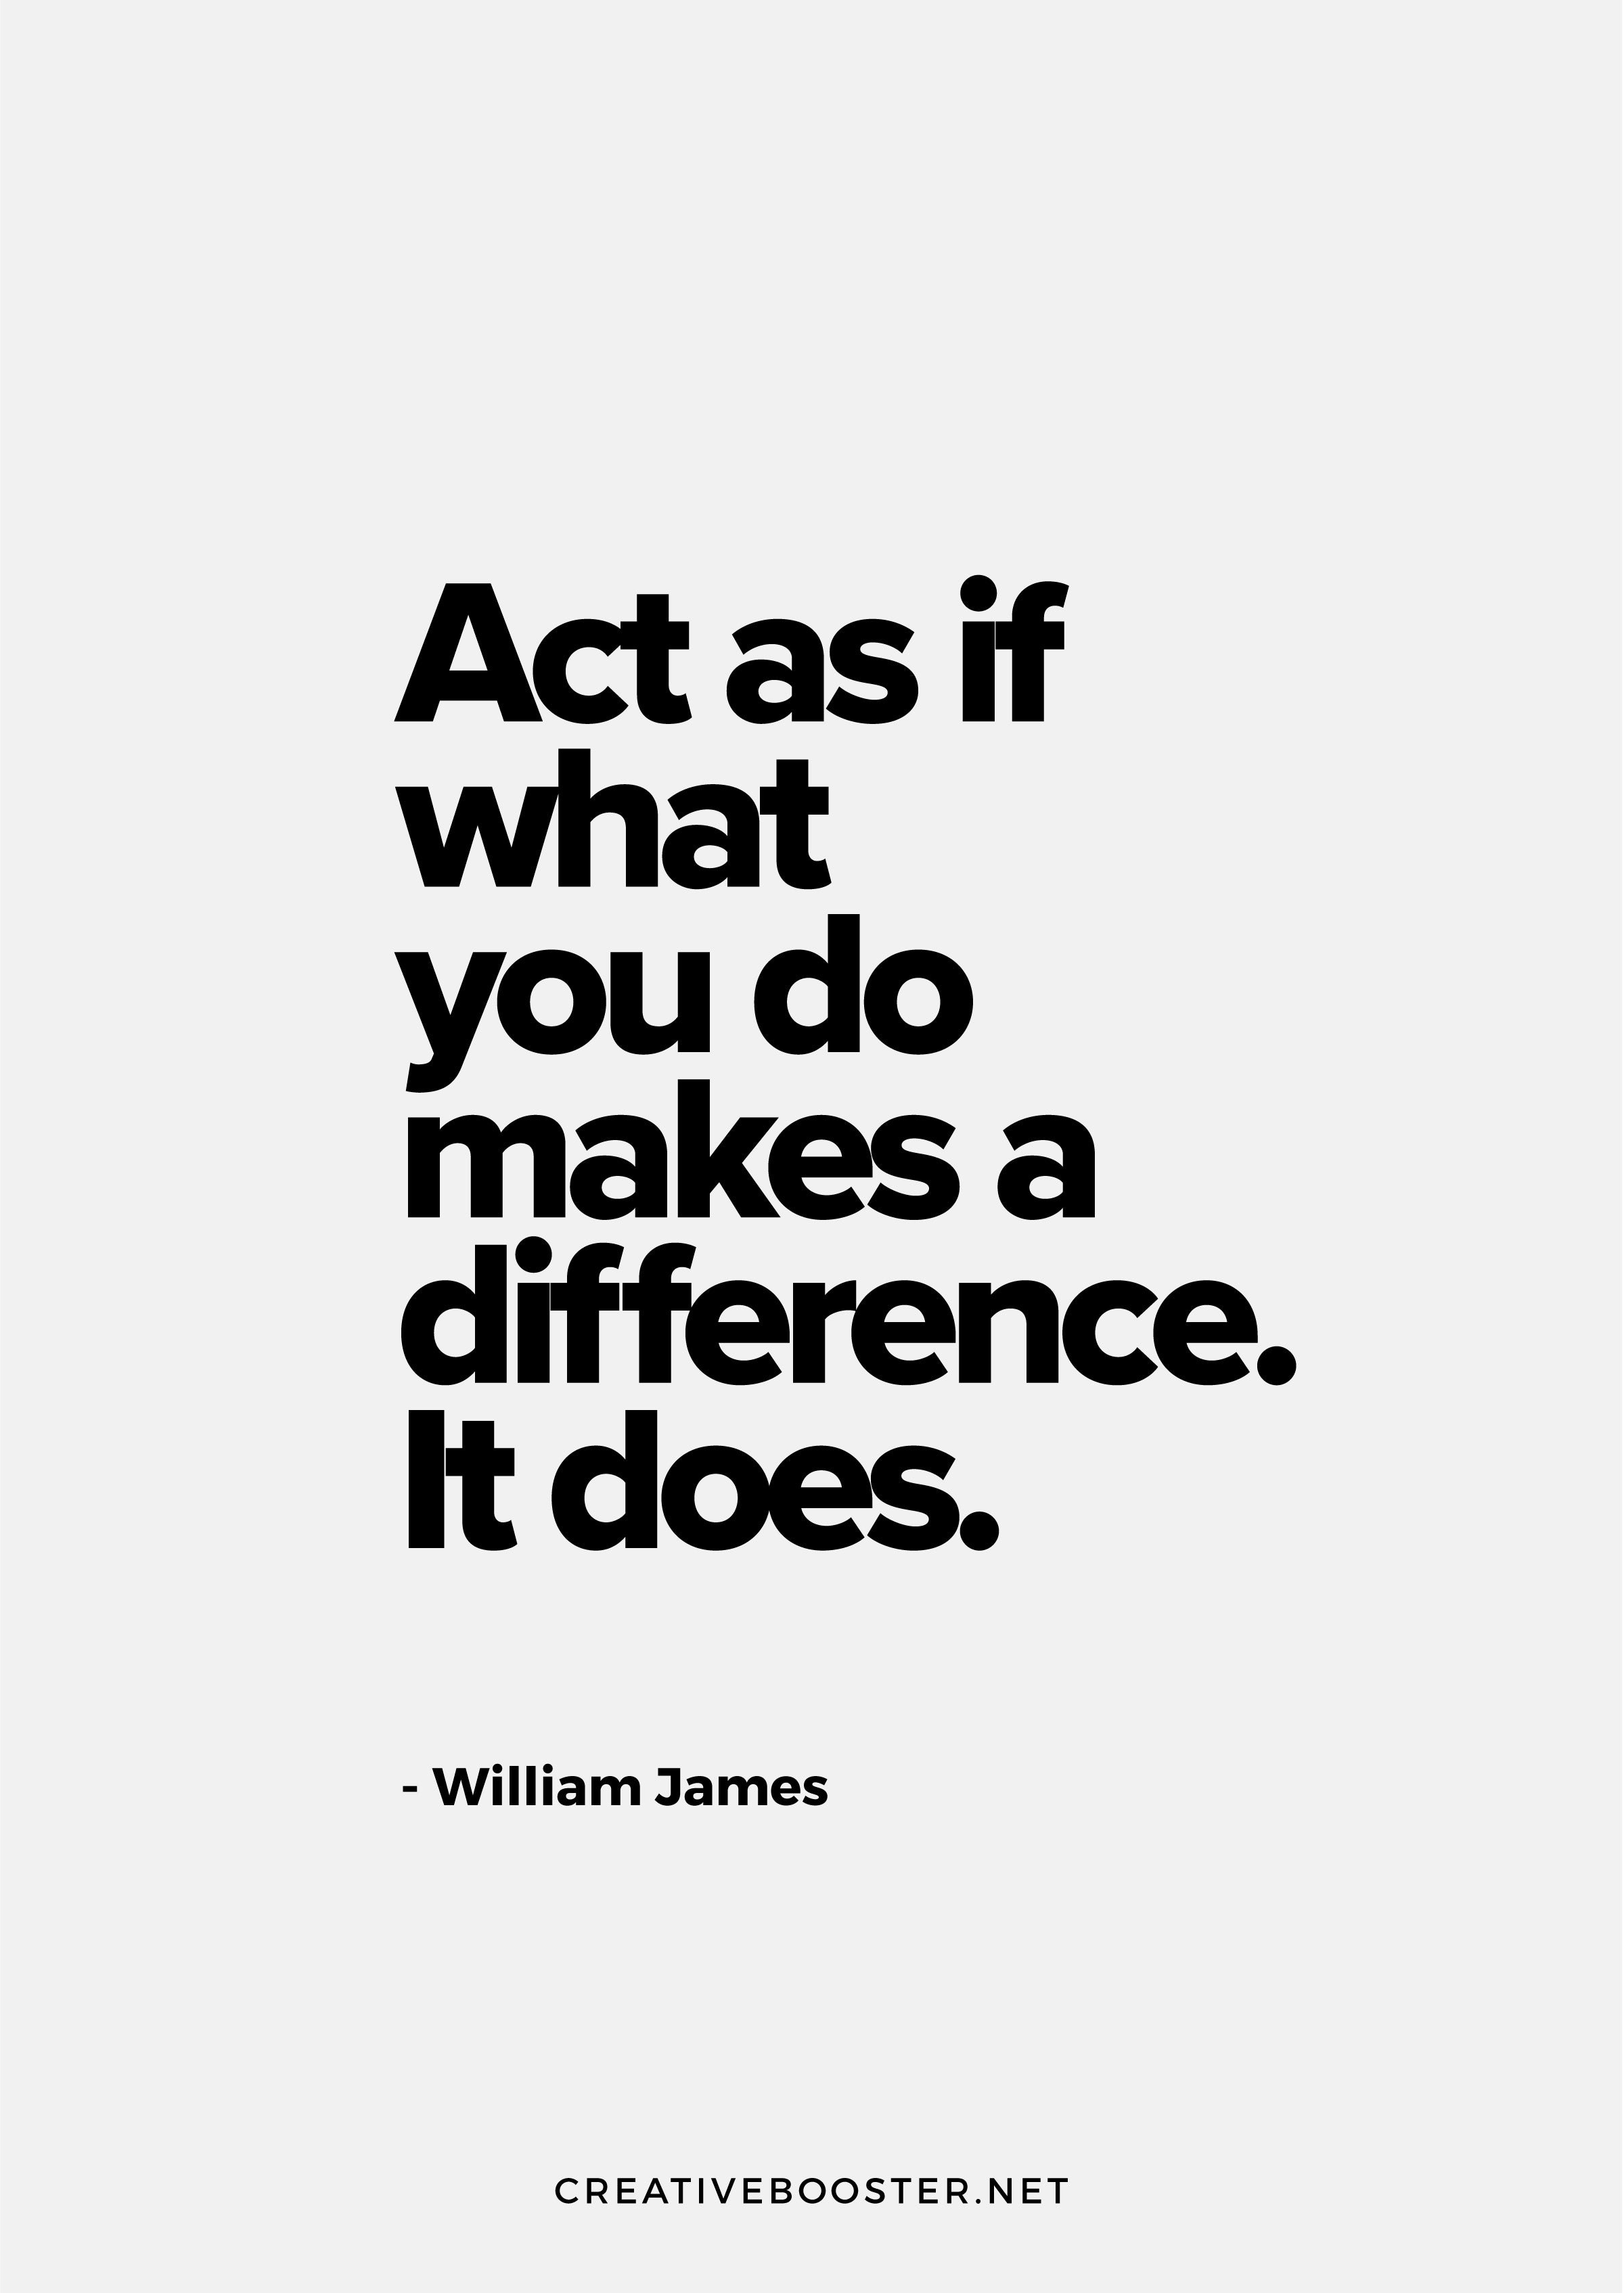 Motivational-You-Got-This-Quotes-"Act as if what you do makes a difference. It does." - William James (Quote Art Print)